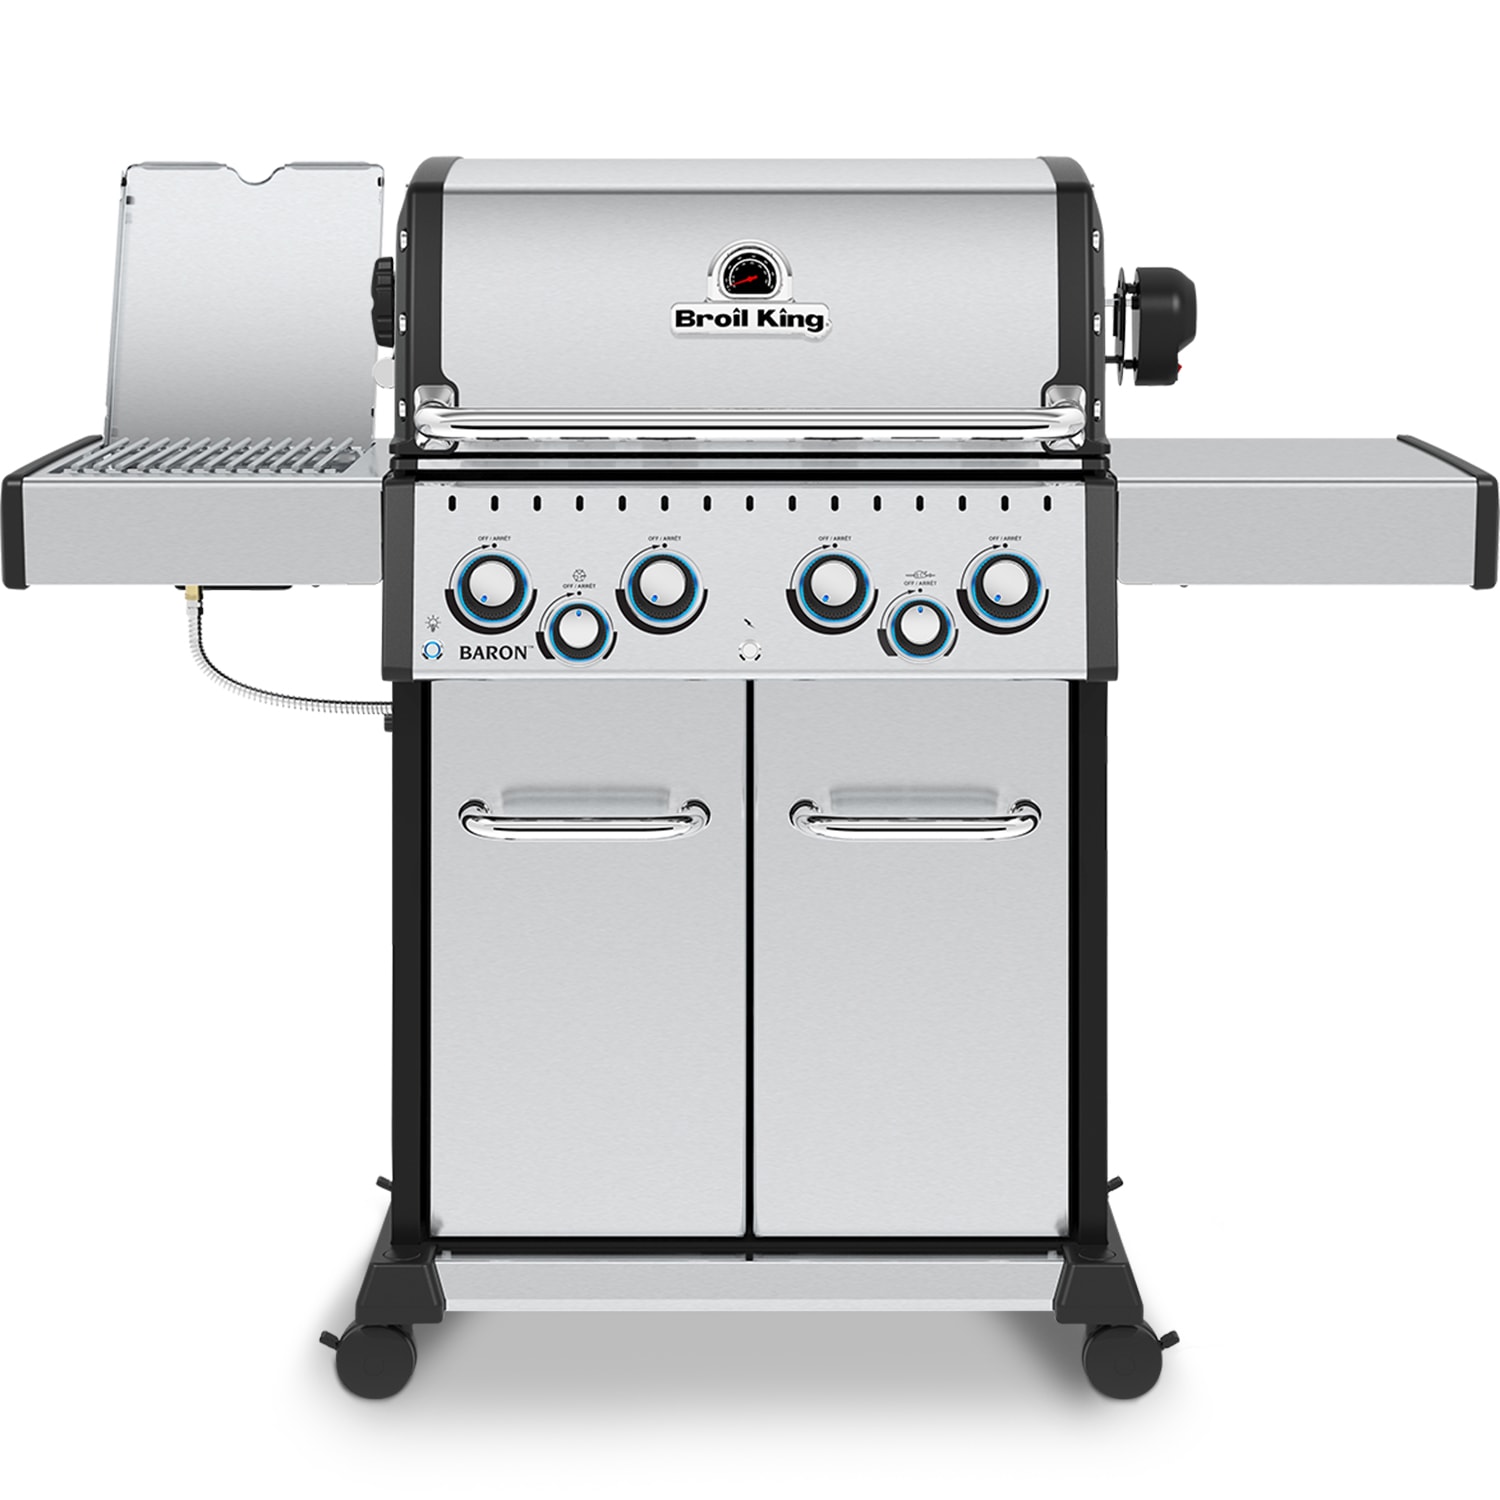 KIING'S Silver Stainless Steel Chicken Grill Machine, Size: 4 Feet X 6 Feet  X 20 Inches